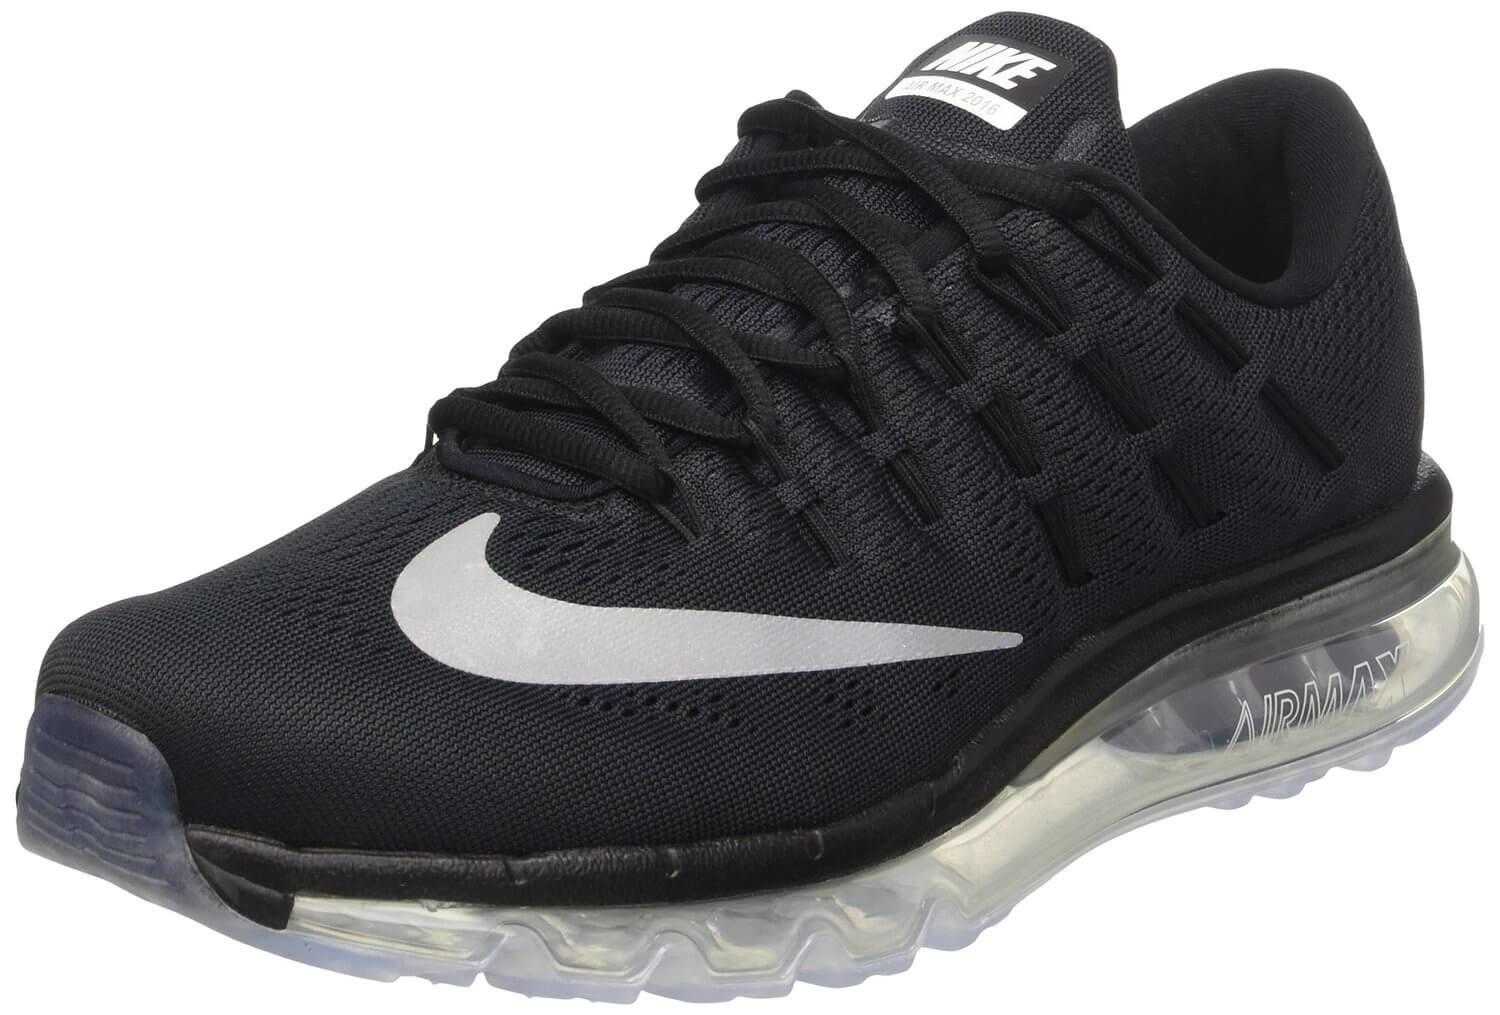 Avanzar Ropa Miguel Ángel Nike Air Max 2022 Reviewed & Rated for Quality in 2022 | RunnerClick